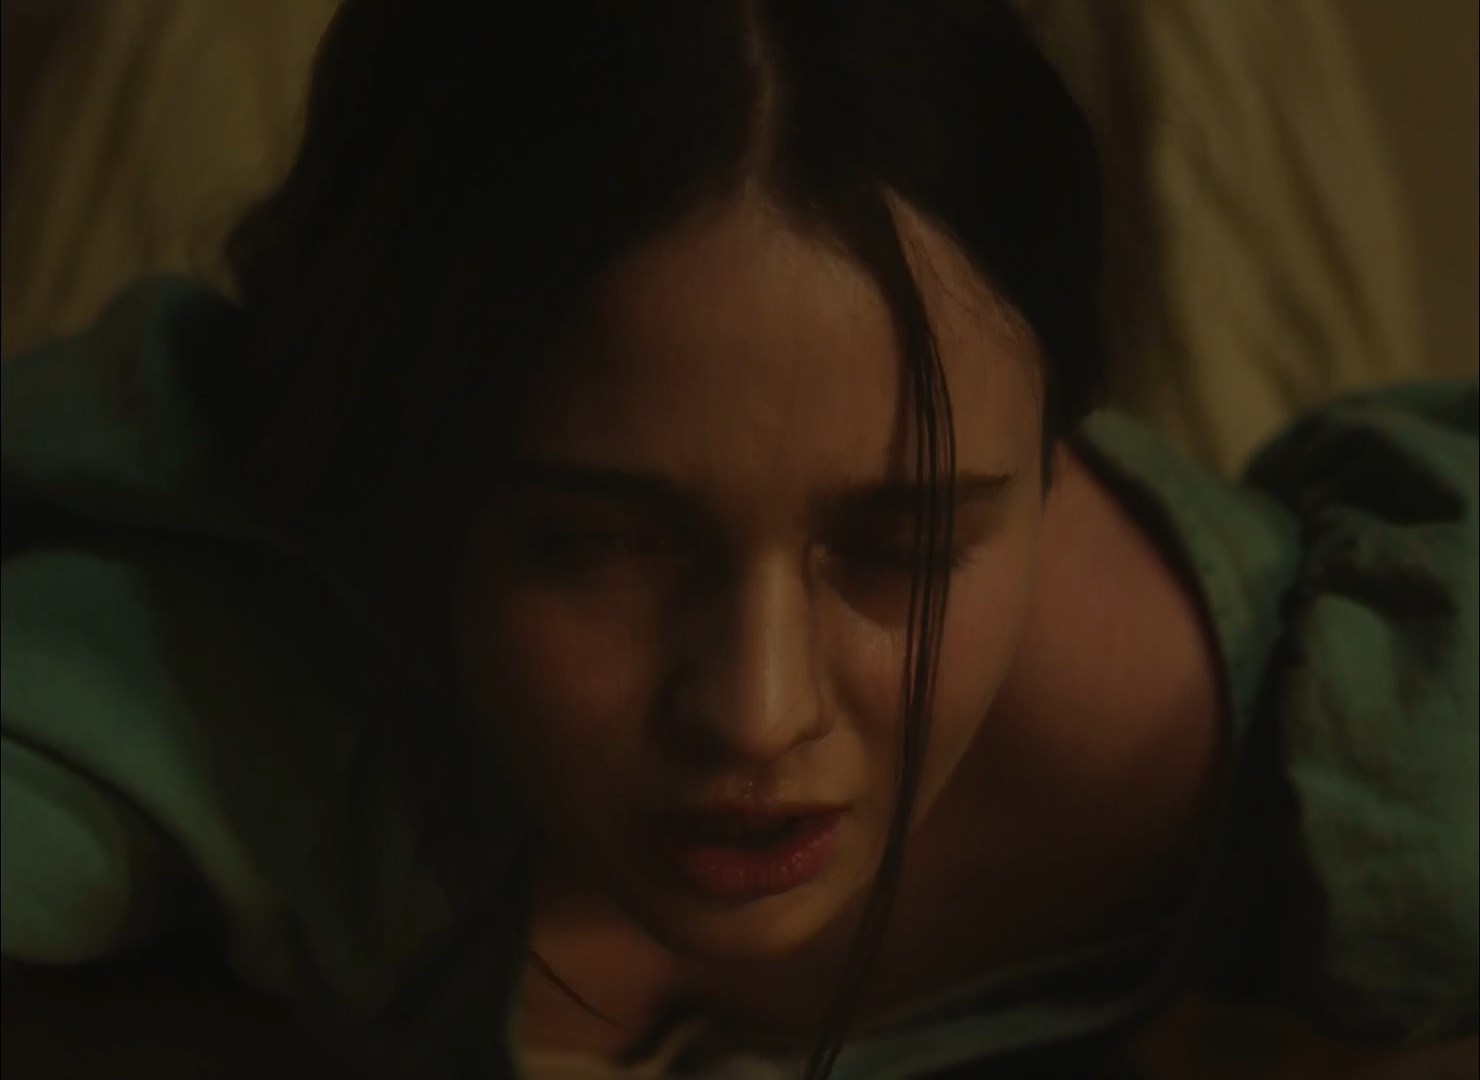 Nude video celebs » Aisling Franciosi sexy - The Nightingale (2018)